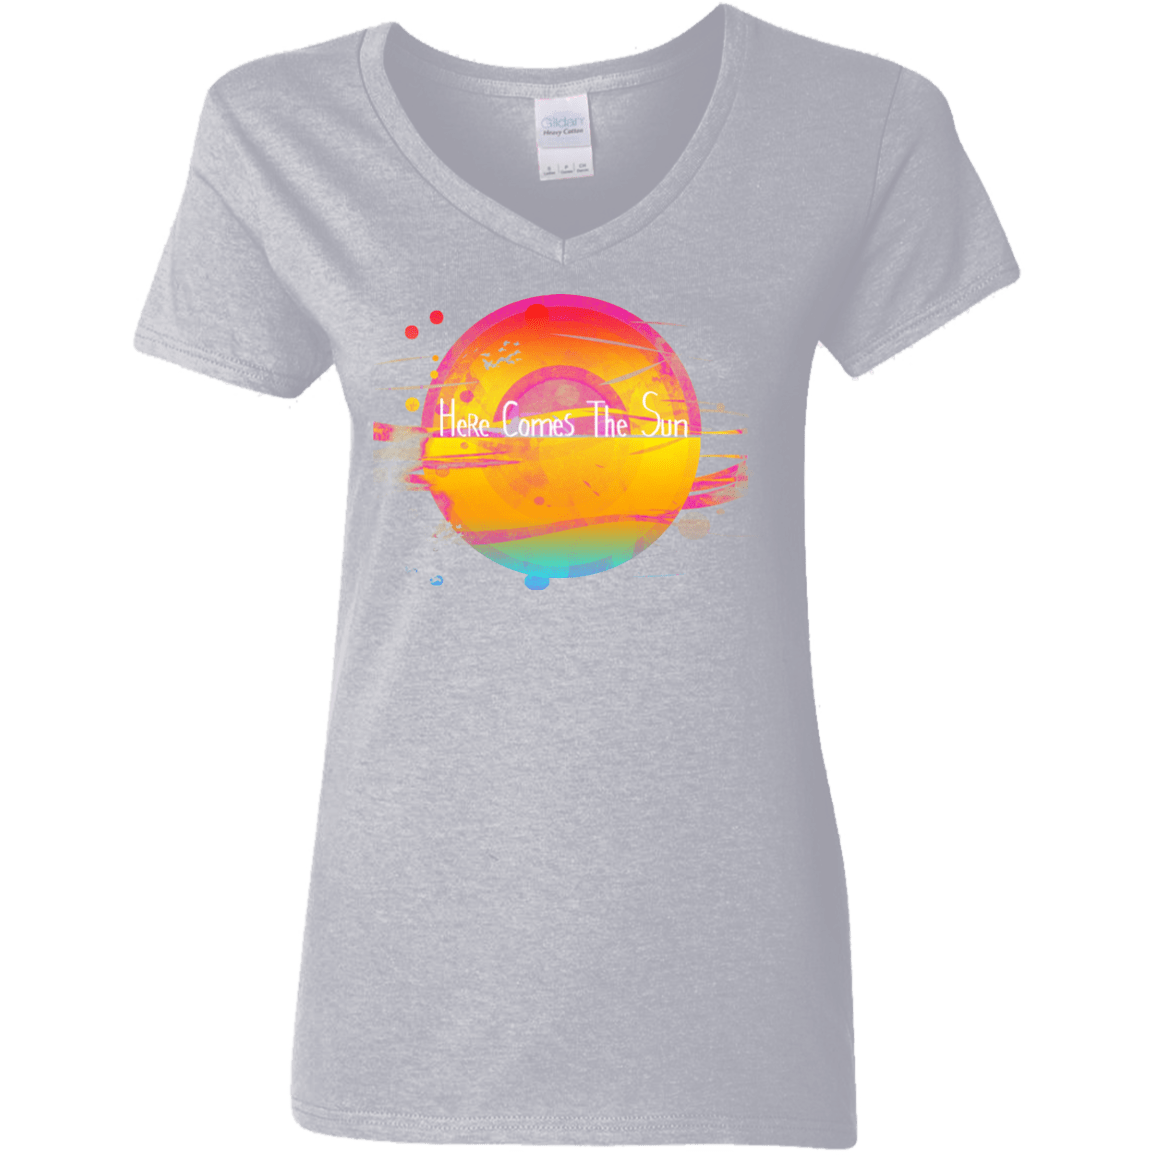 T-Shirts Sport Grey / S Here Comes The Sun (2) Women's V-Neck T-Shirt